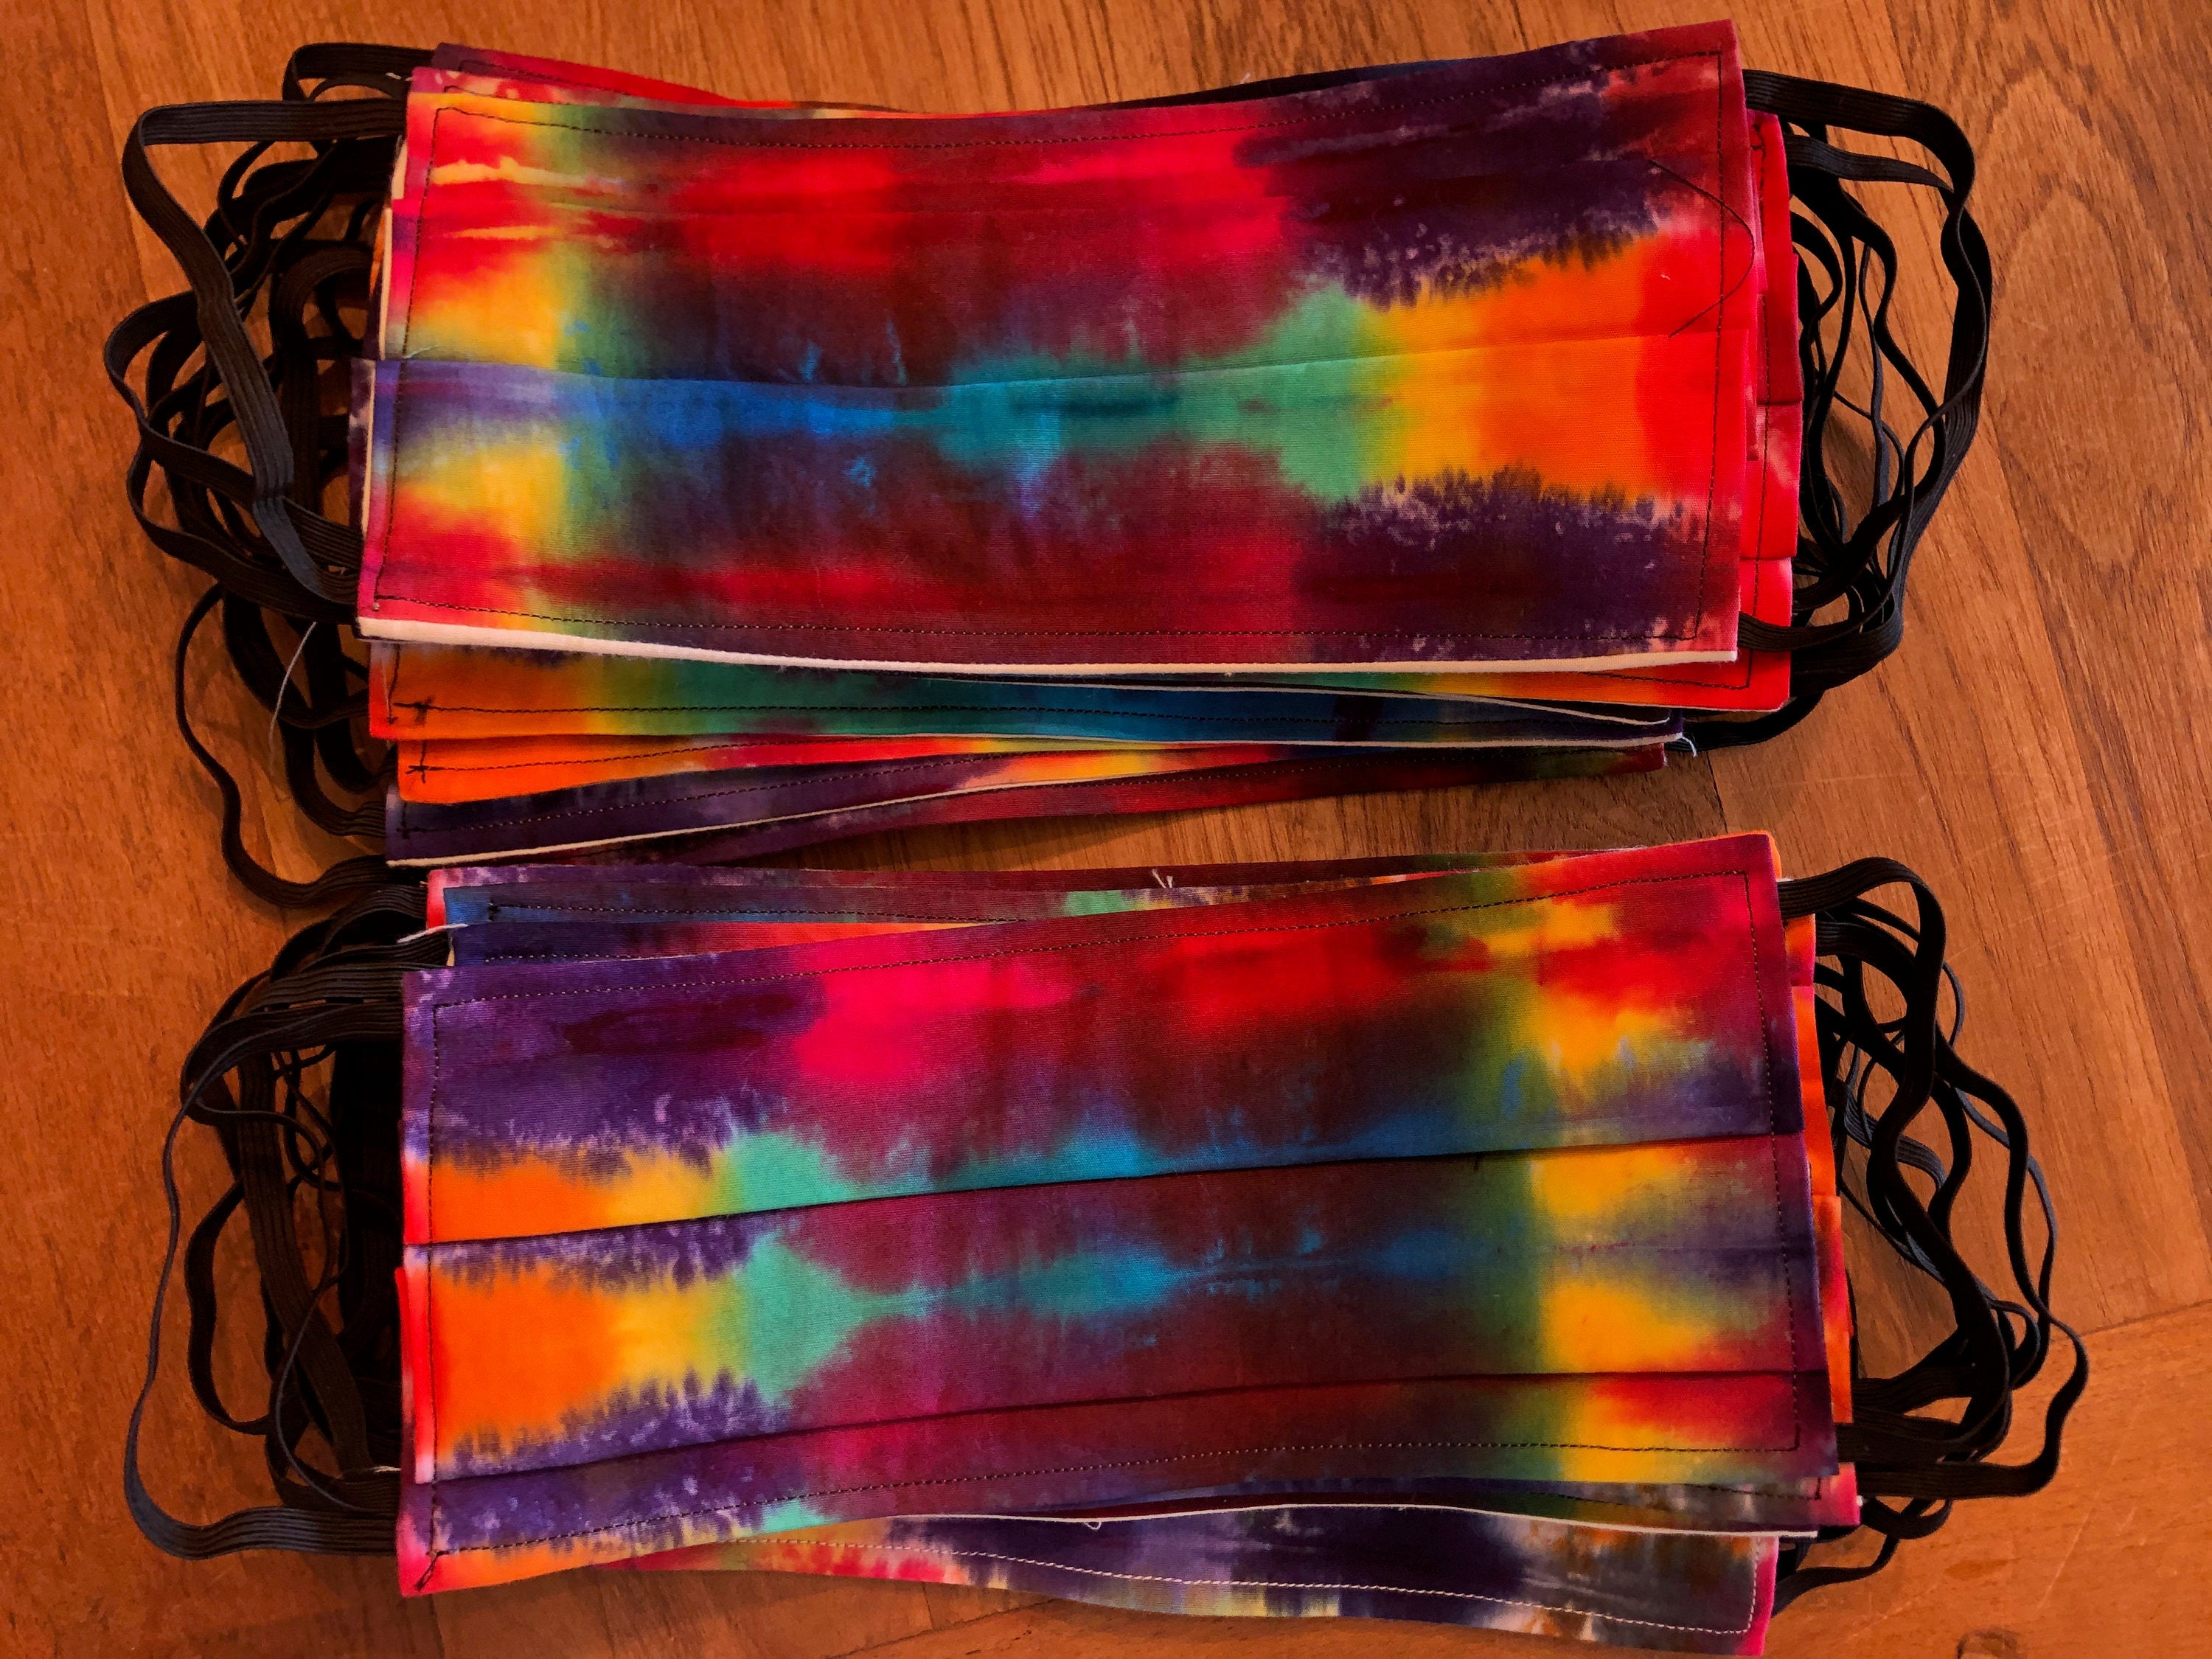 Tie Dye Face Covering - 100% Cotton, 2 Layers, Washable, Reusable - Colorway 3 (Rainbow)